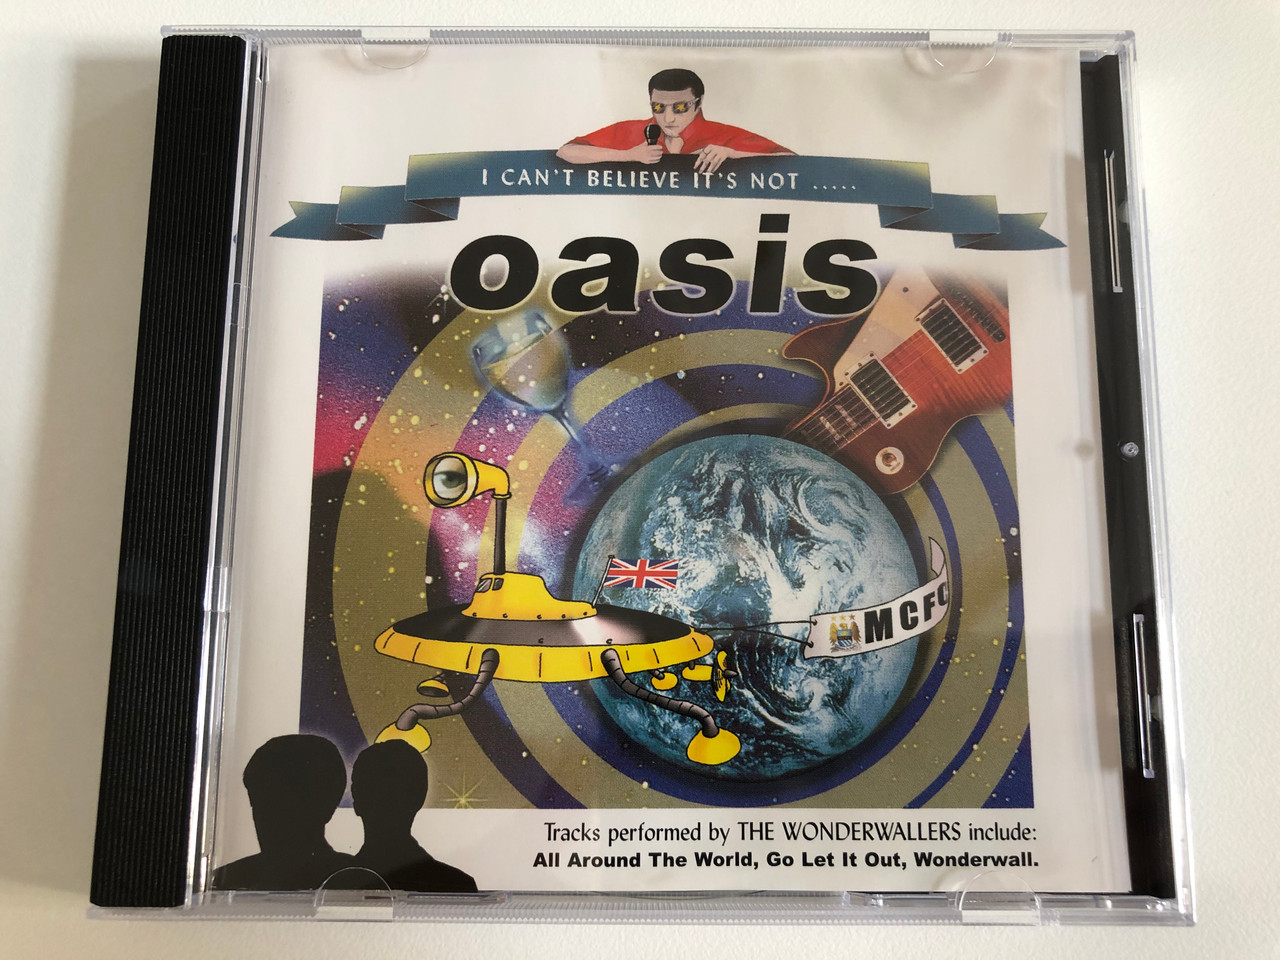 https://cdn10.bigcommerce.com/s-62bdpkt7pb/products/31263/images/184036/I_Cant_Believe_Its_Not..._-_Oasis_Track_performed_by_The_Wonderwallers_Include_All_Around_The_World_Go_Let_It_Out_Wonderwall_Pegasus_Audio_CD_2000_ICBINCD031_1__73068.1625844658.1280.1280.JPG?c=2